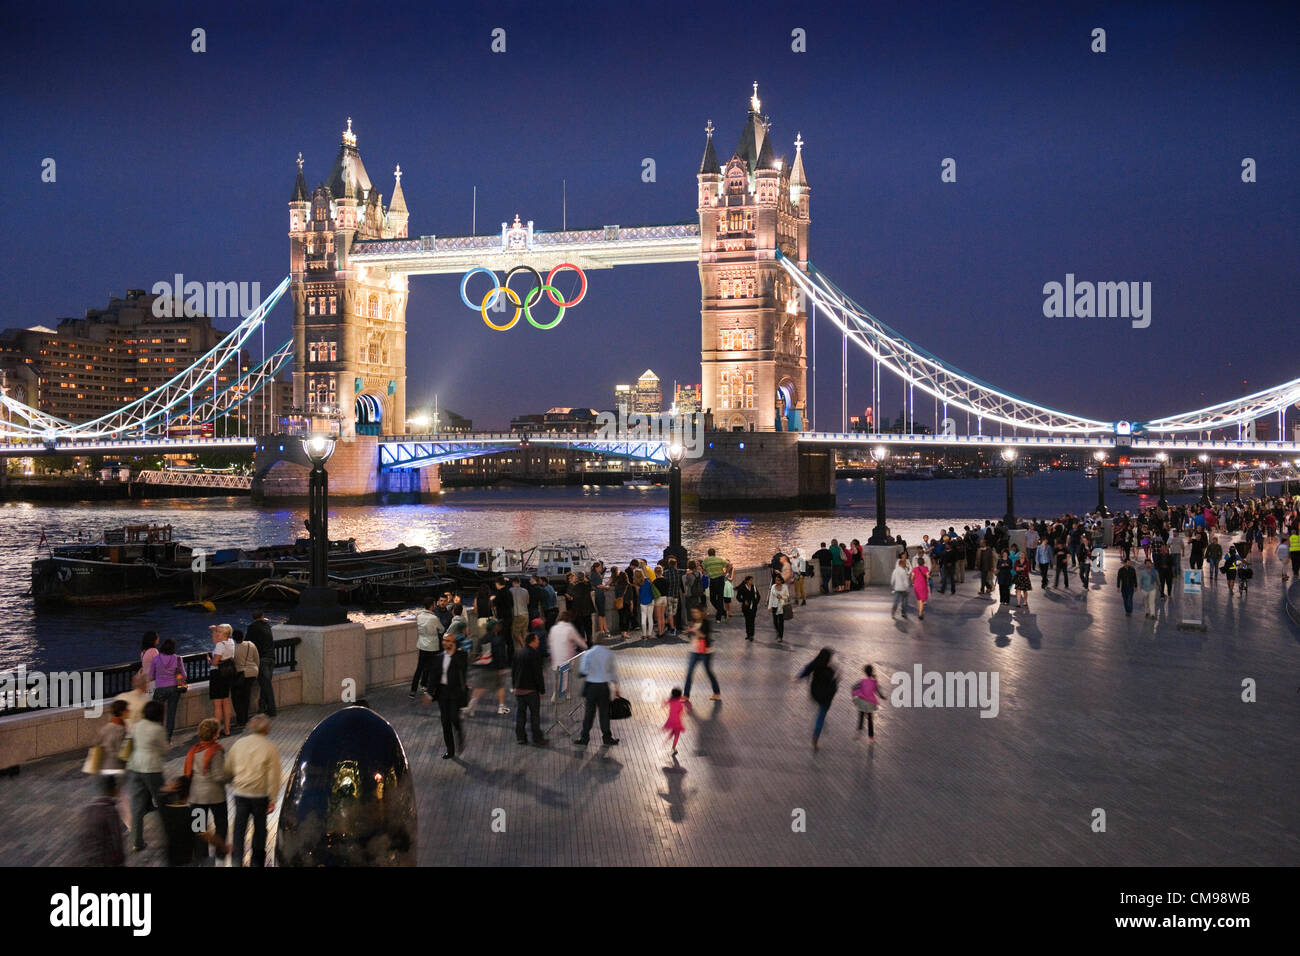 London, UK Wednesday27th June 2012. Following the unveiling of the Olympic Rings on Tower Bridge earlier in the day, crowds were treated to a spectacular preview of the light show that will play nightly during the Olympic Games. London is hosting the 30th Summer Olympic Games which begin on July 27th 2012. Stock Photo